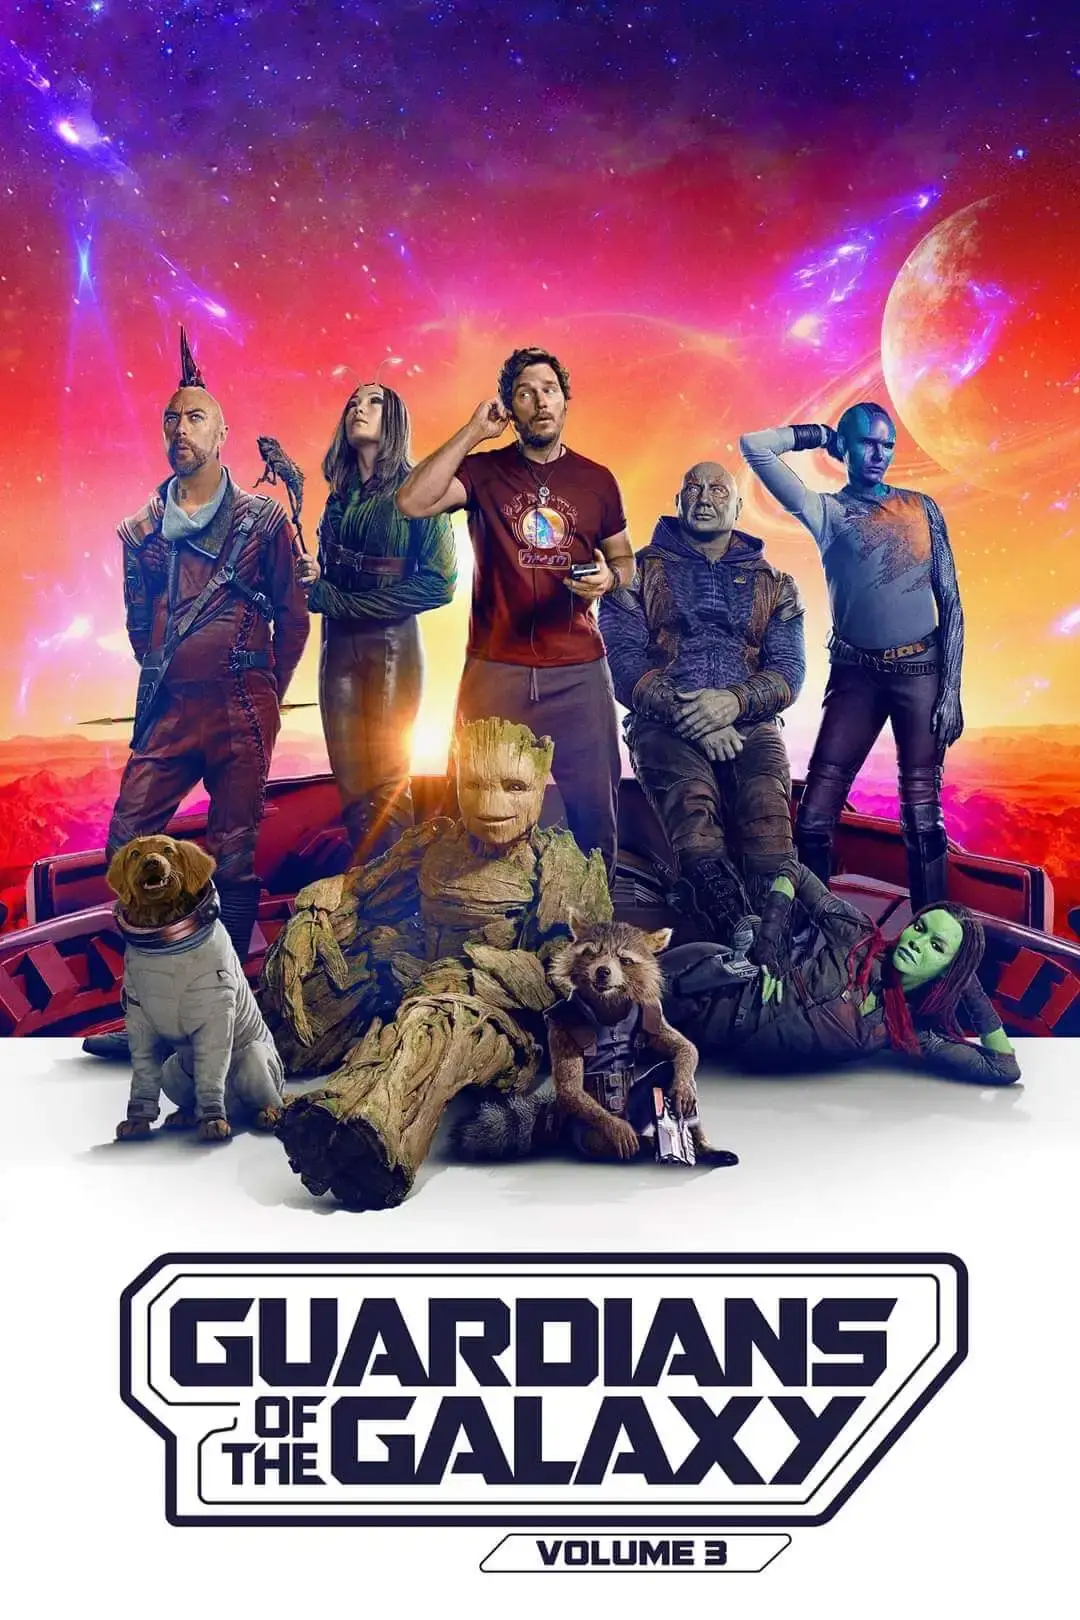 Guardians of the Galaxy Movie Review